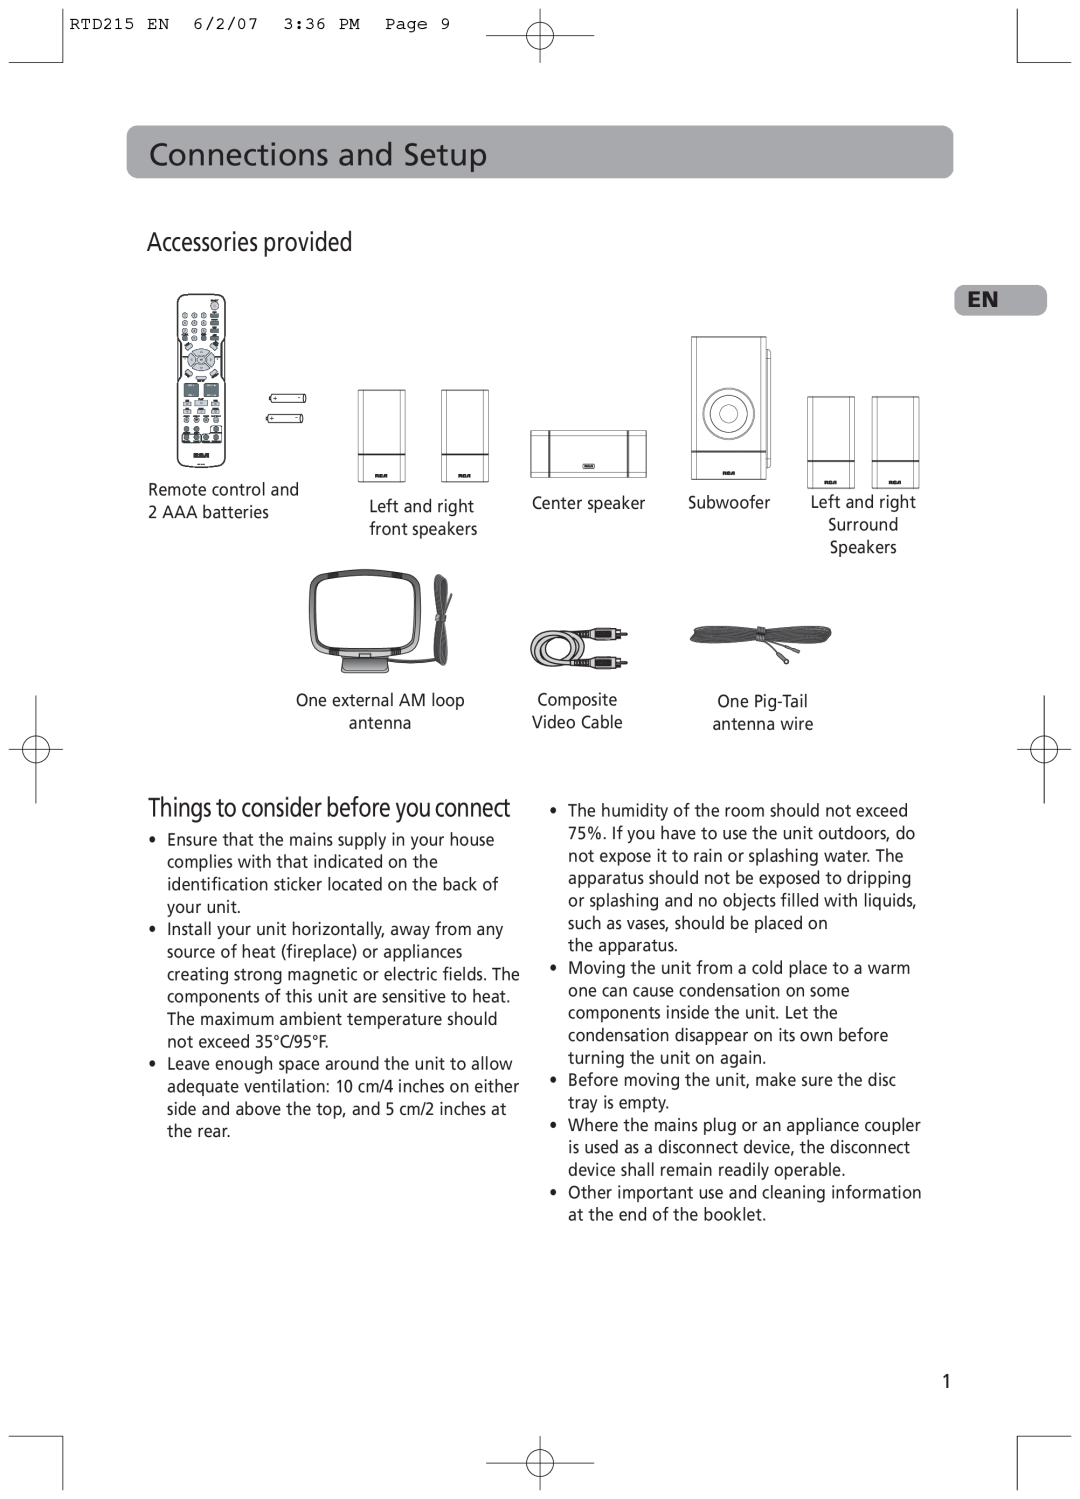 RCA RTD215 user manual Connections and Setup, Accessories provided, Things to consider before you connect 